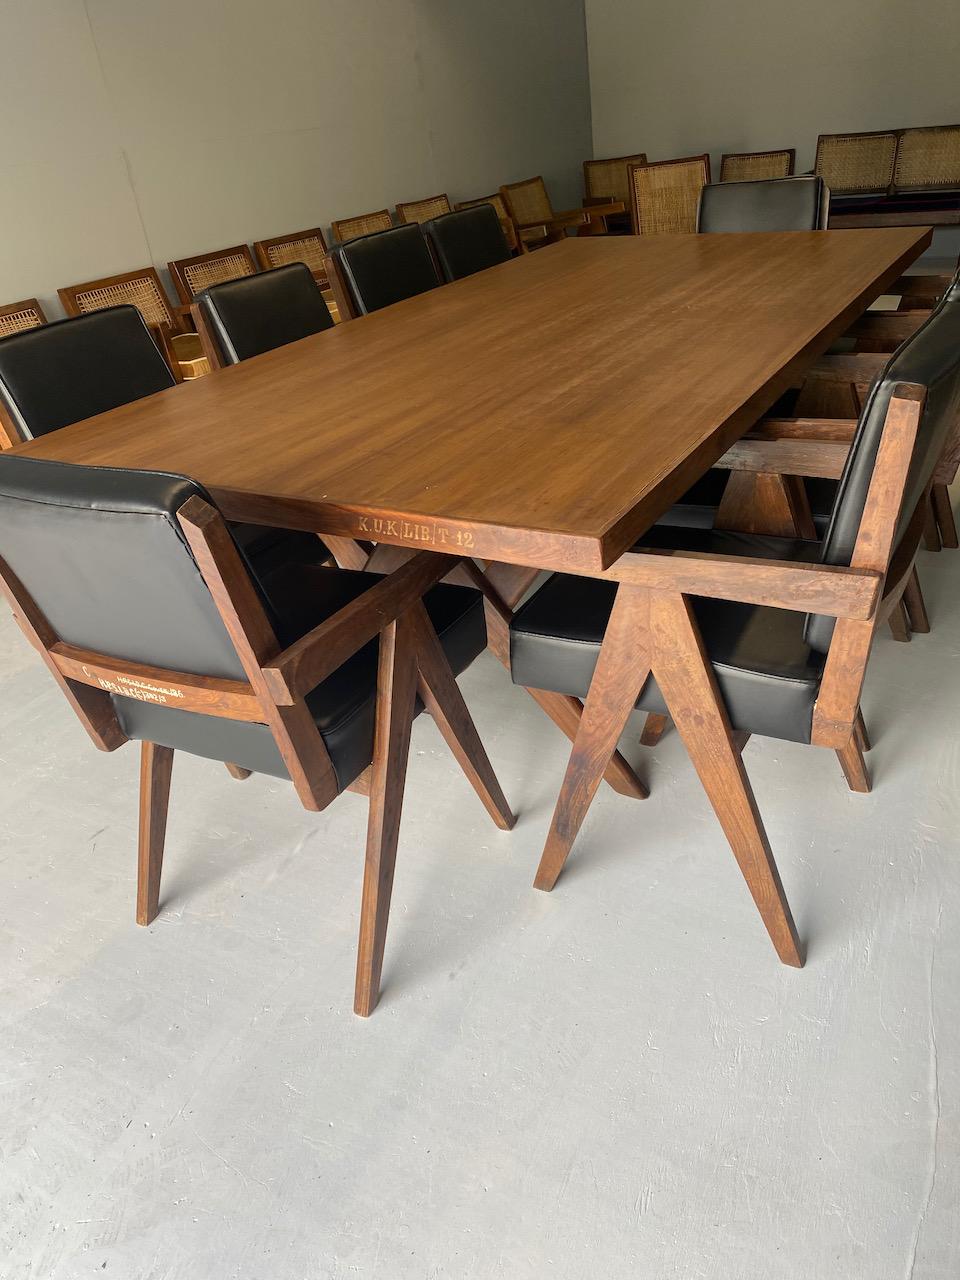 Indian Pierre Jeanneret Dining Table & Ten Chairs Teak Chandigarh Circa 1960s